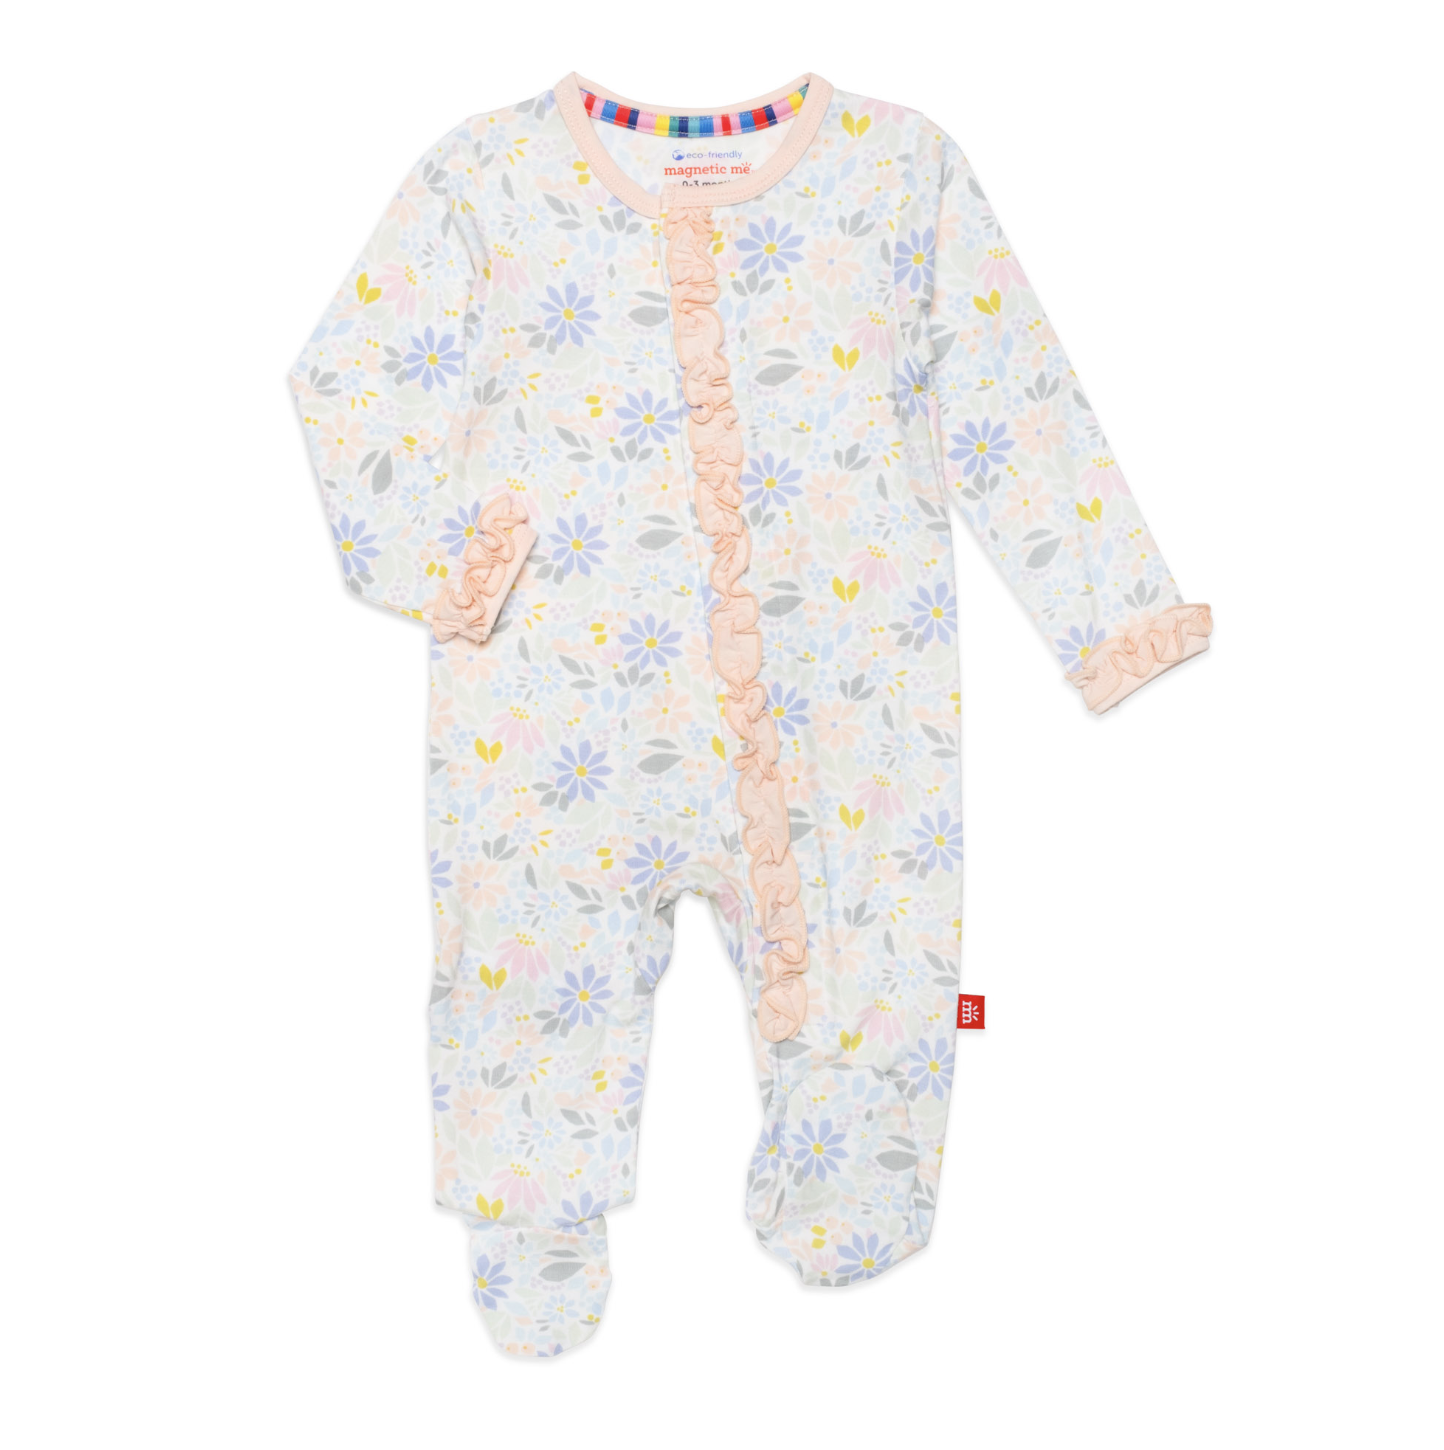 MAGNETIC ME Darby Footie 3-6 MTH